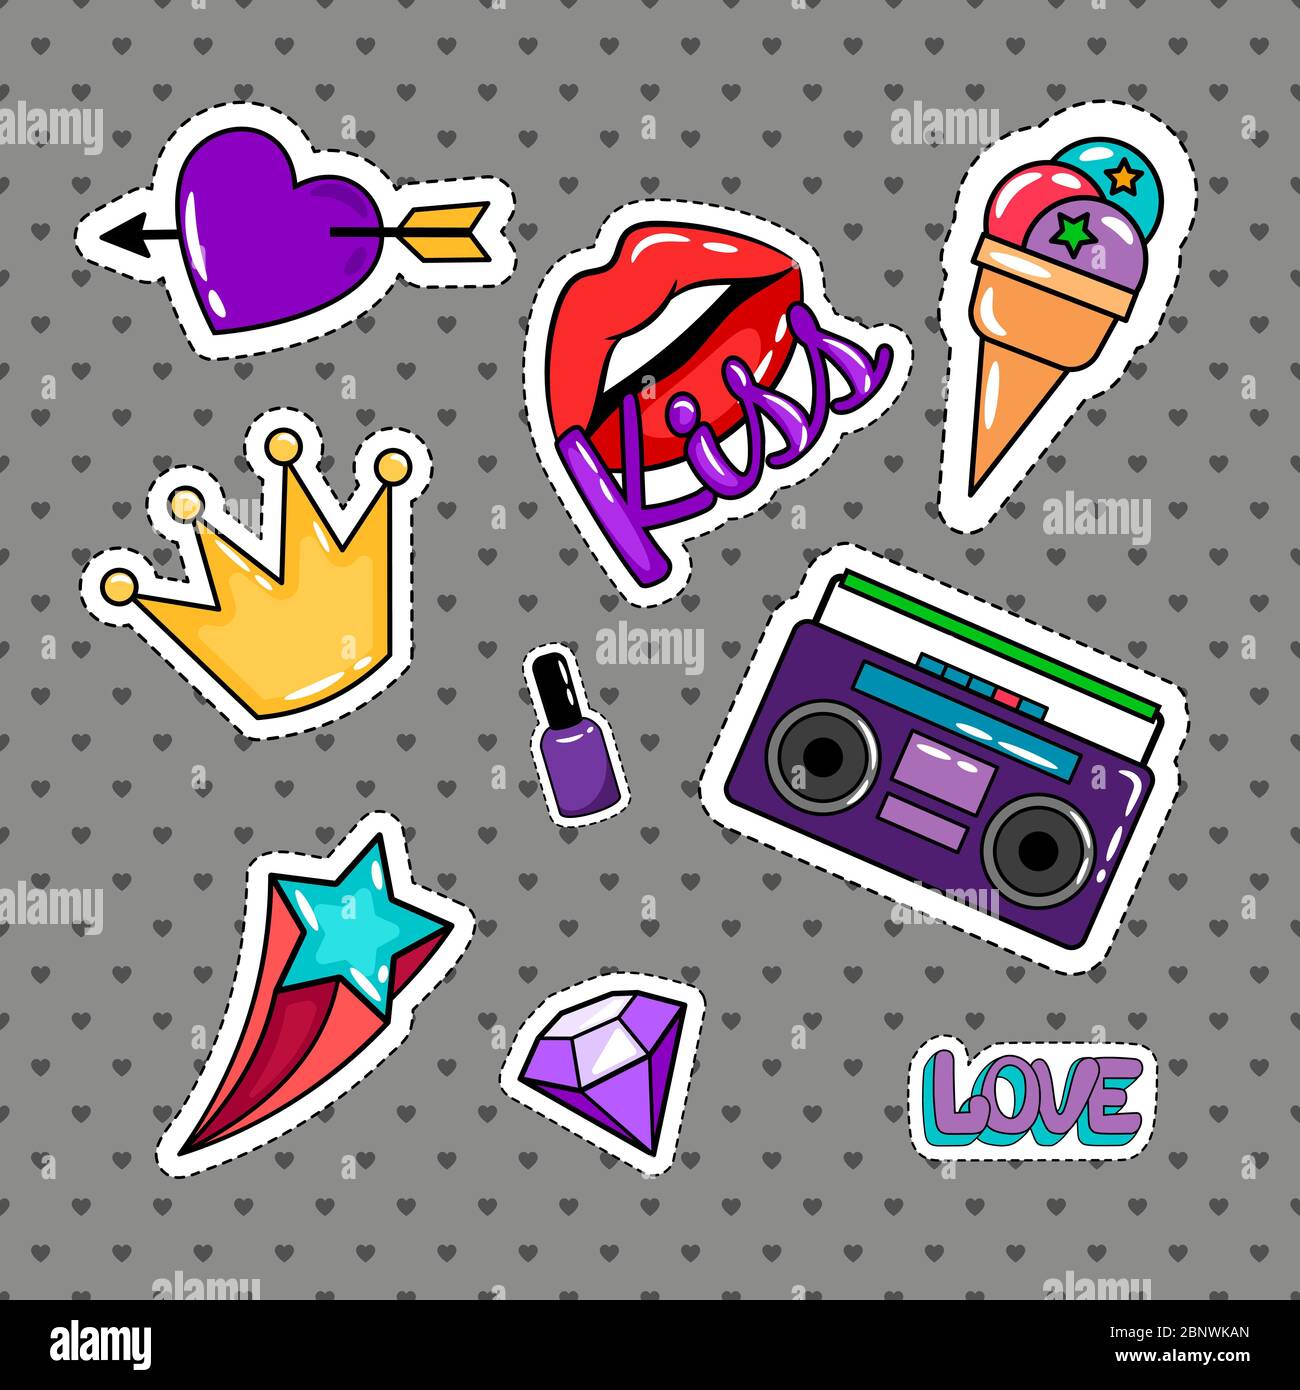 Cartoon stickers or patches set with 90s style Vector Image